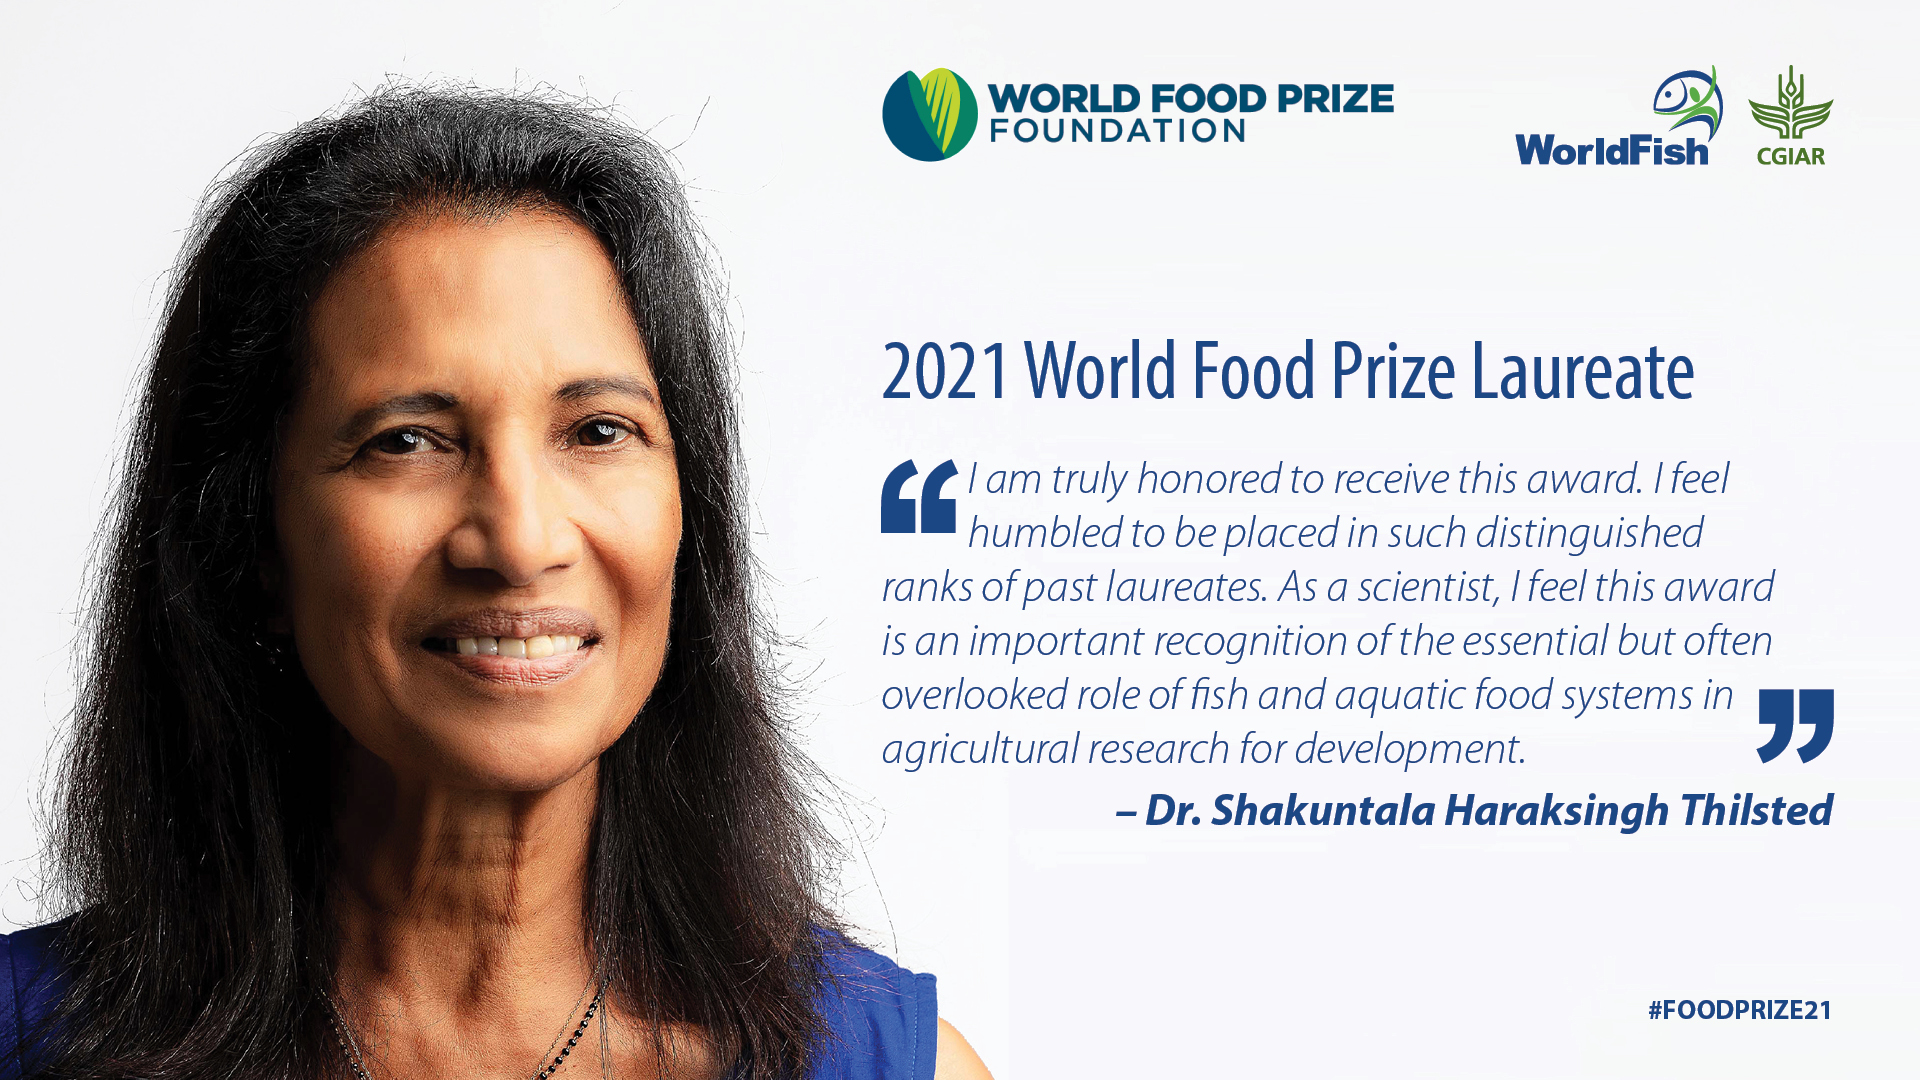 The future is fish: World Food Prize given to aquatic food systems expert